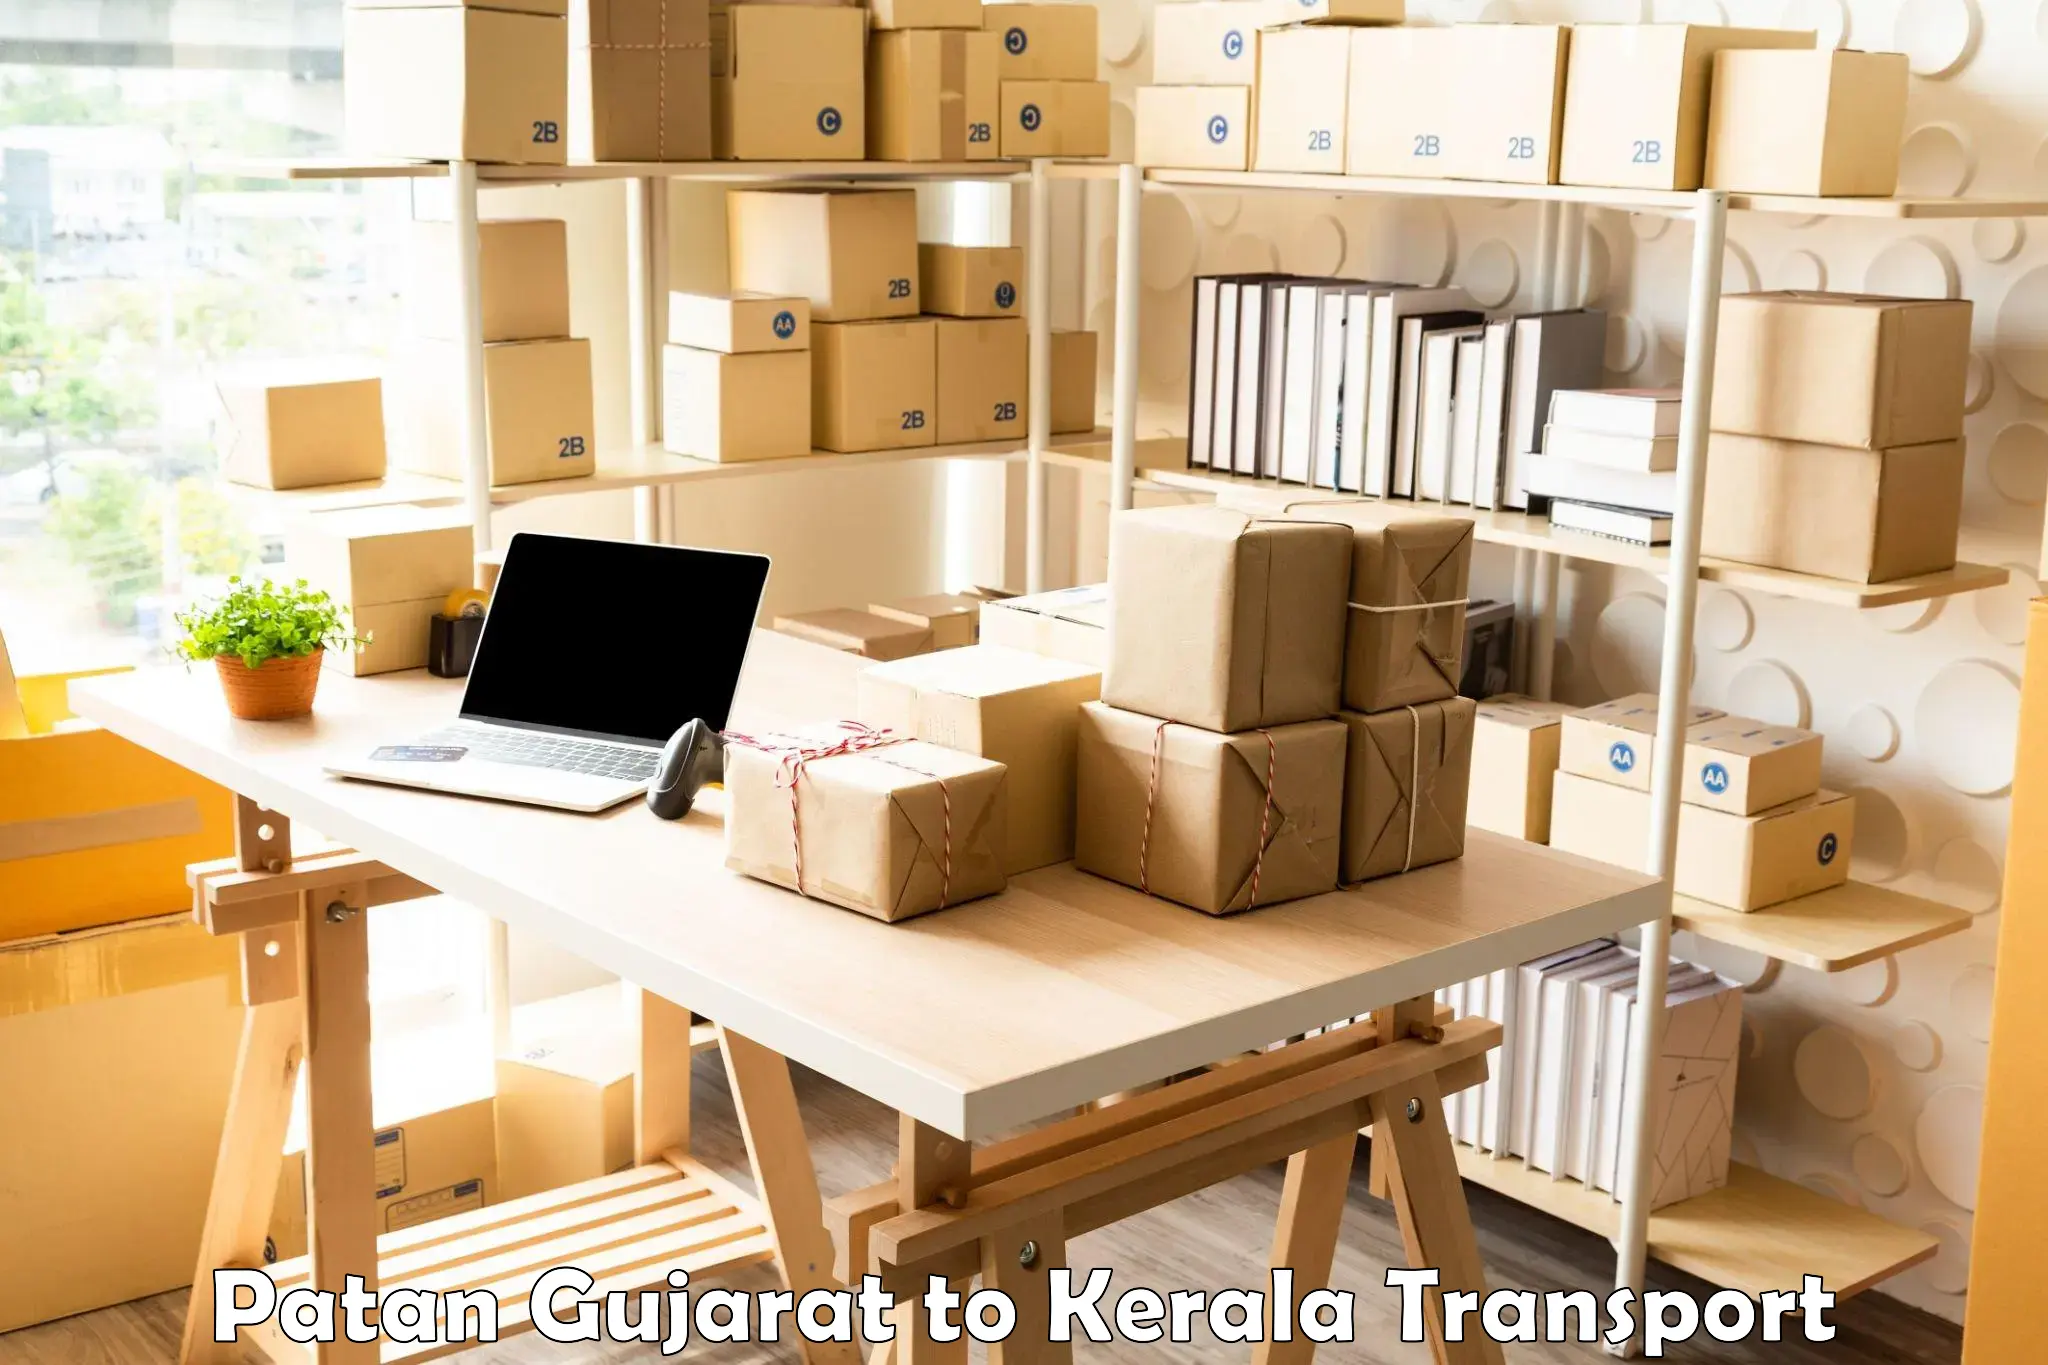 Goods delivery service Patan Gujarat to Kerala